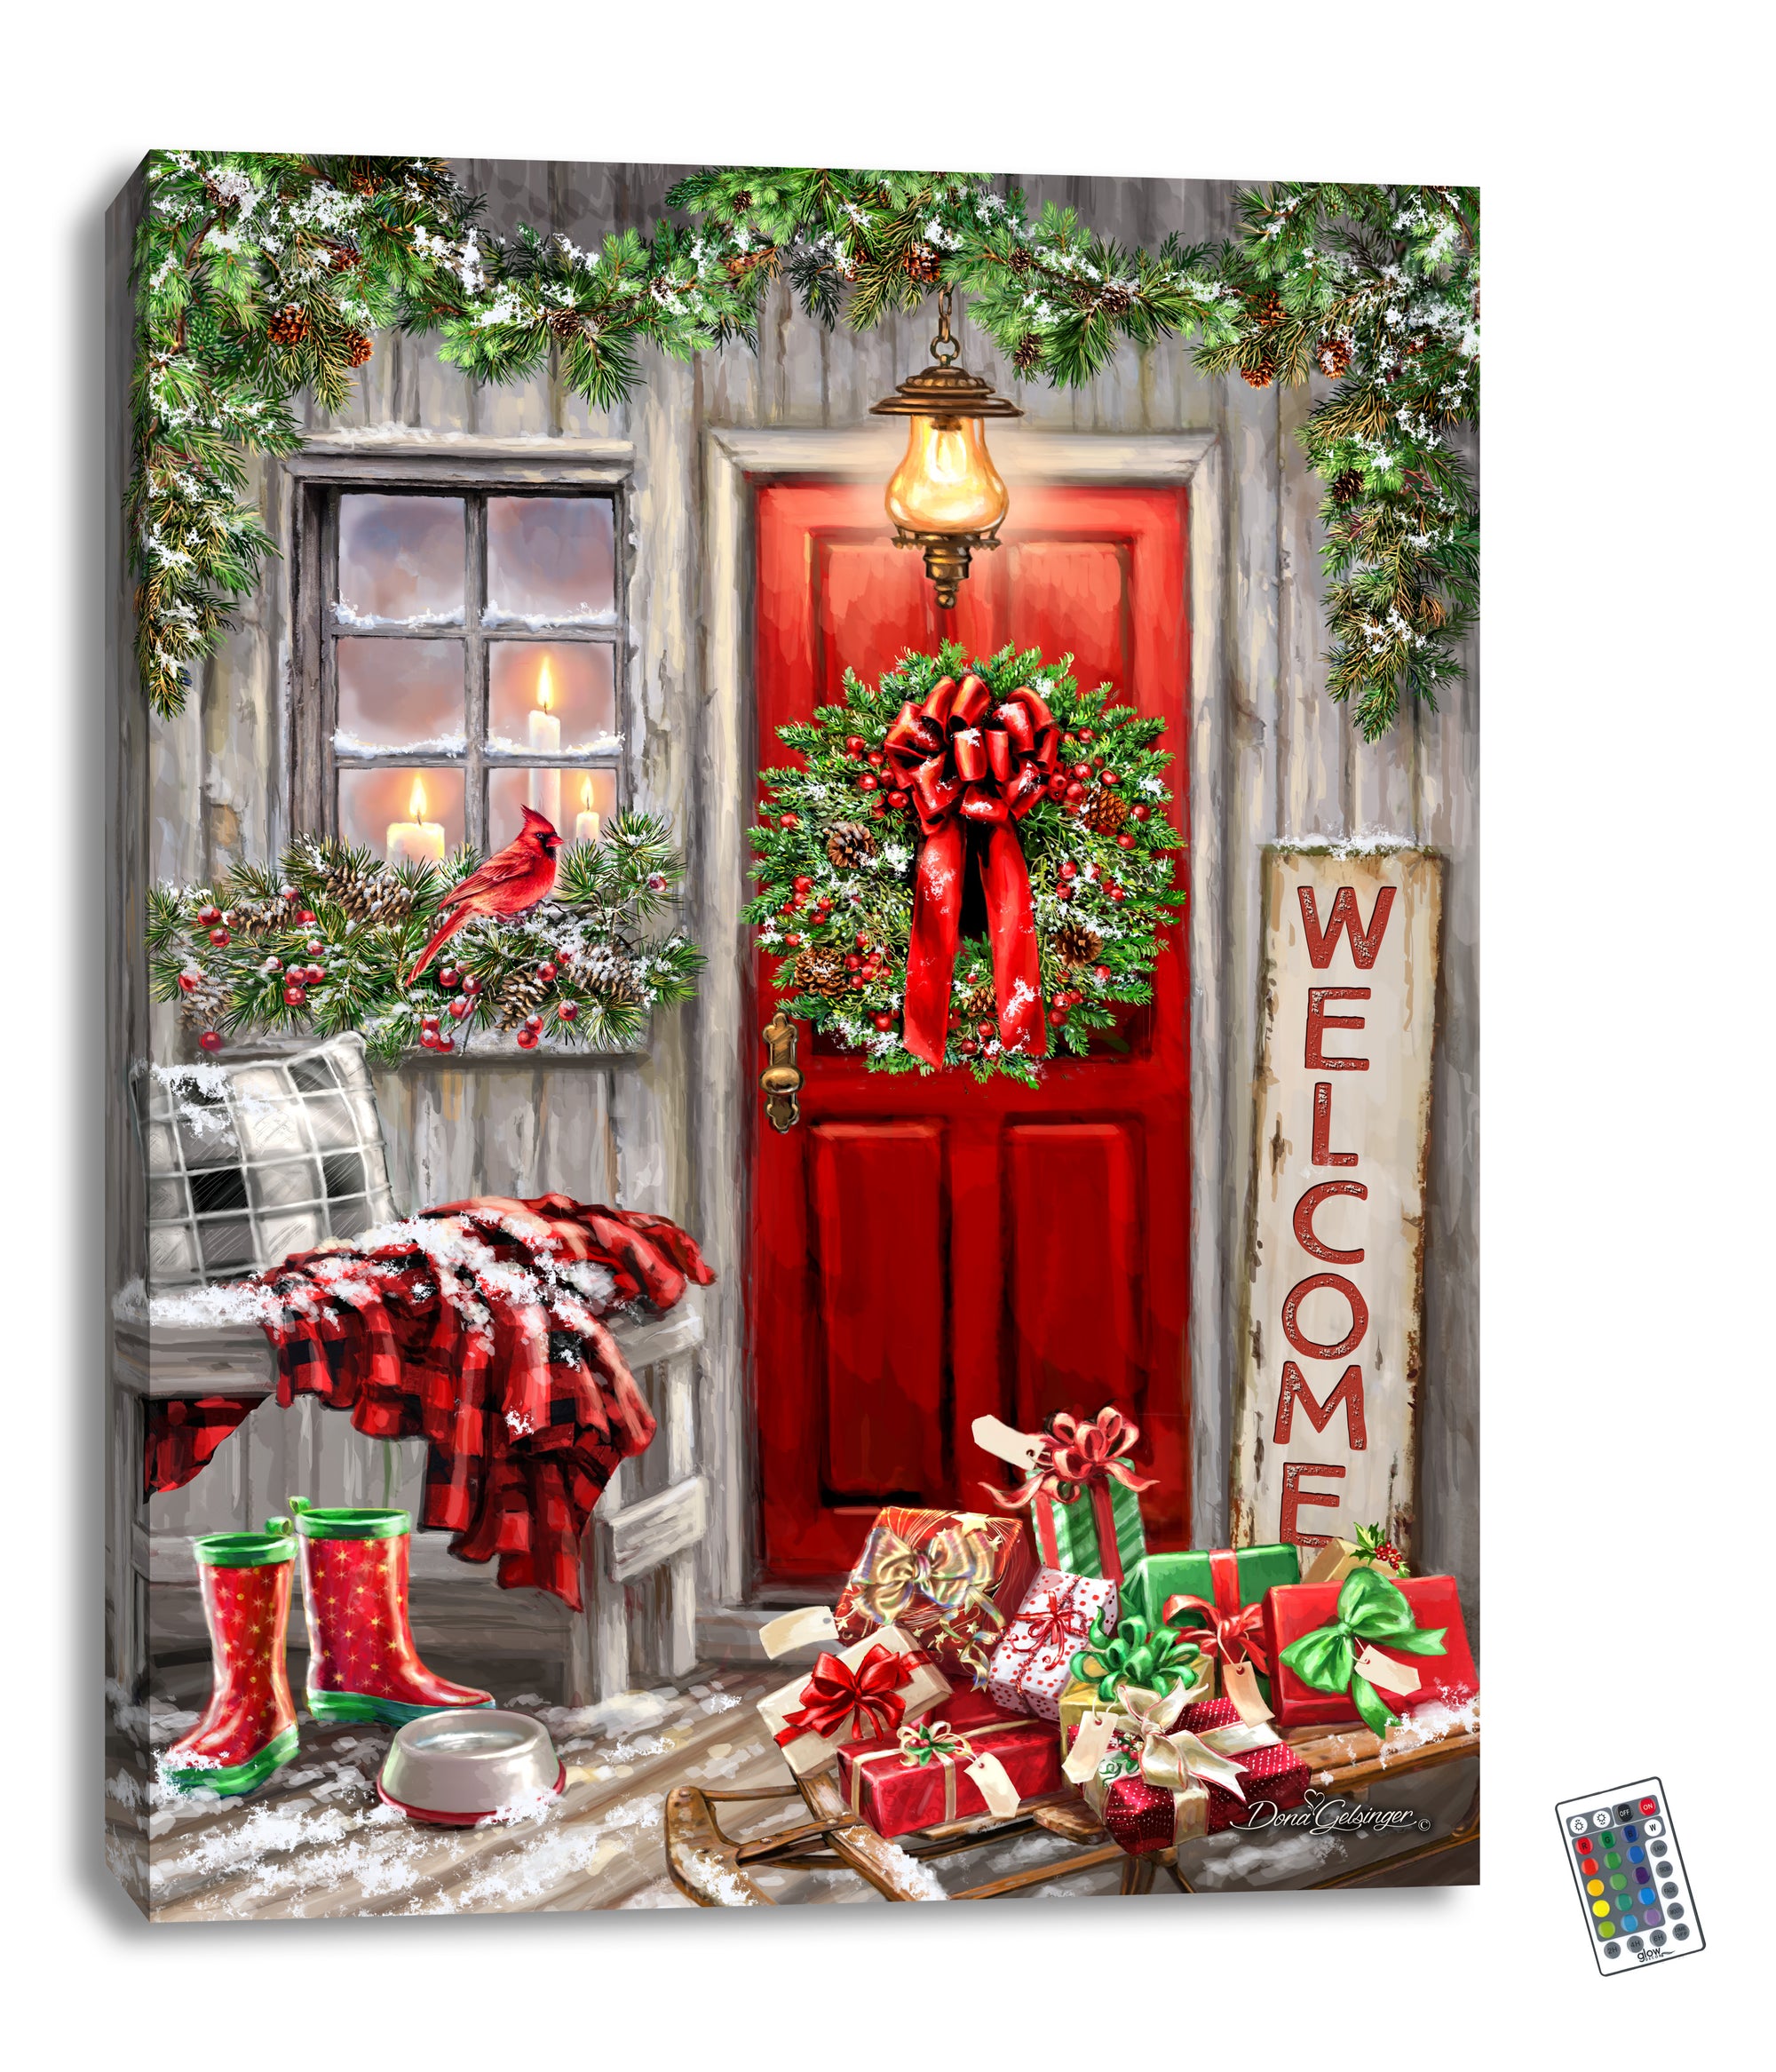 This stunning 18x24 piece features a charming red door adorned with a festive wreath and a welcoming sign that reads "welcome". The warm glow of the LED lights brings the scene to life, illuminating a lantern and garland perched above the door.